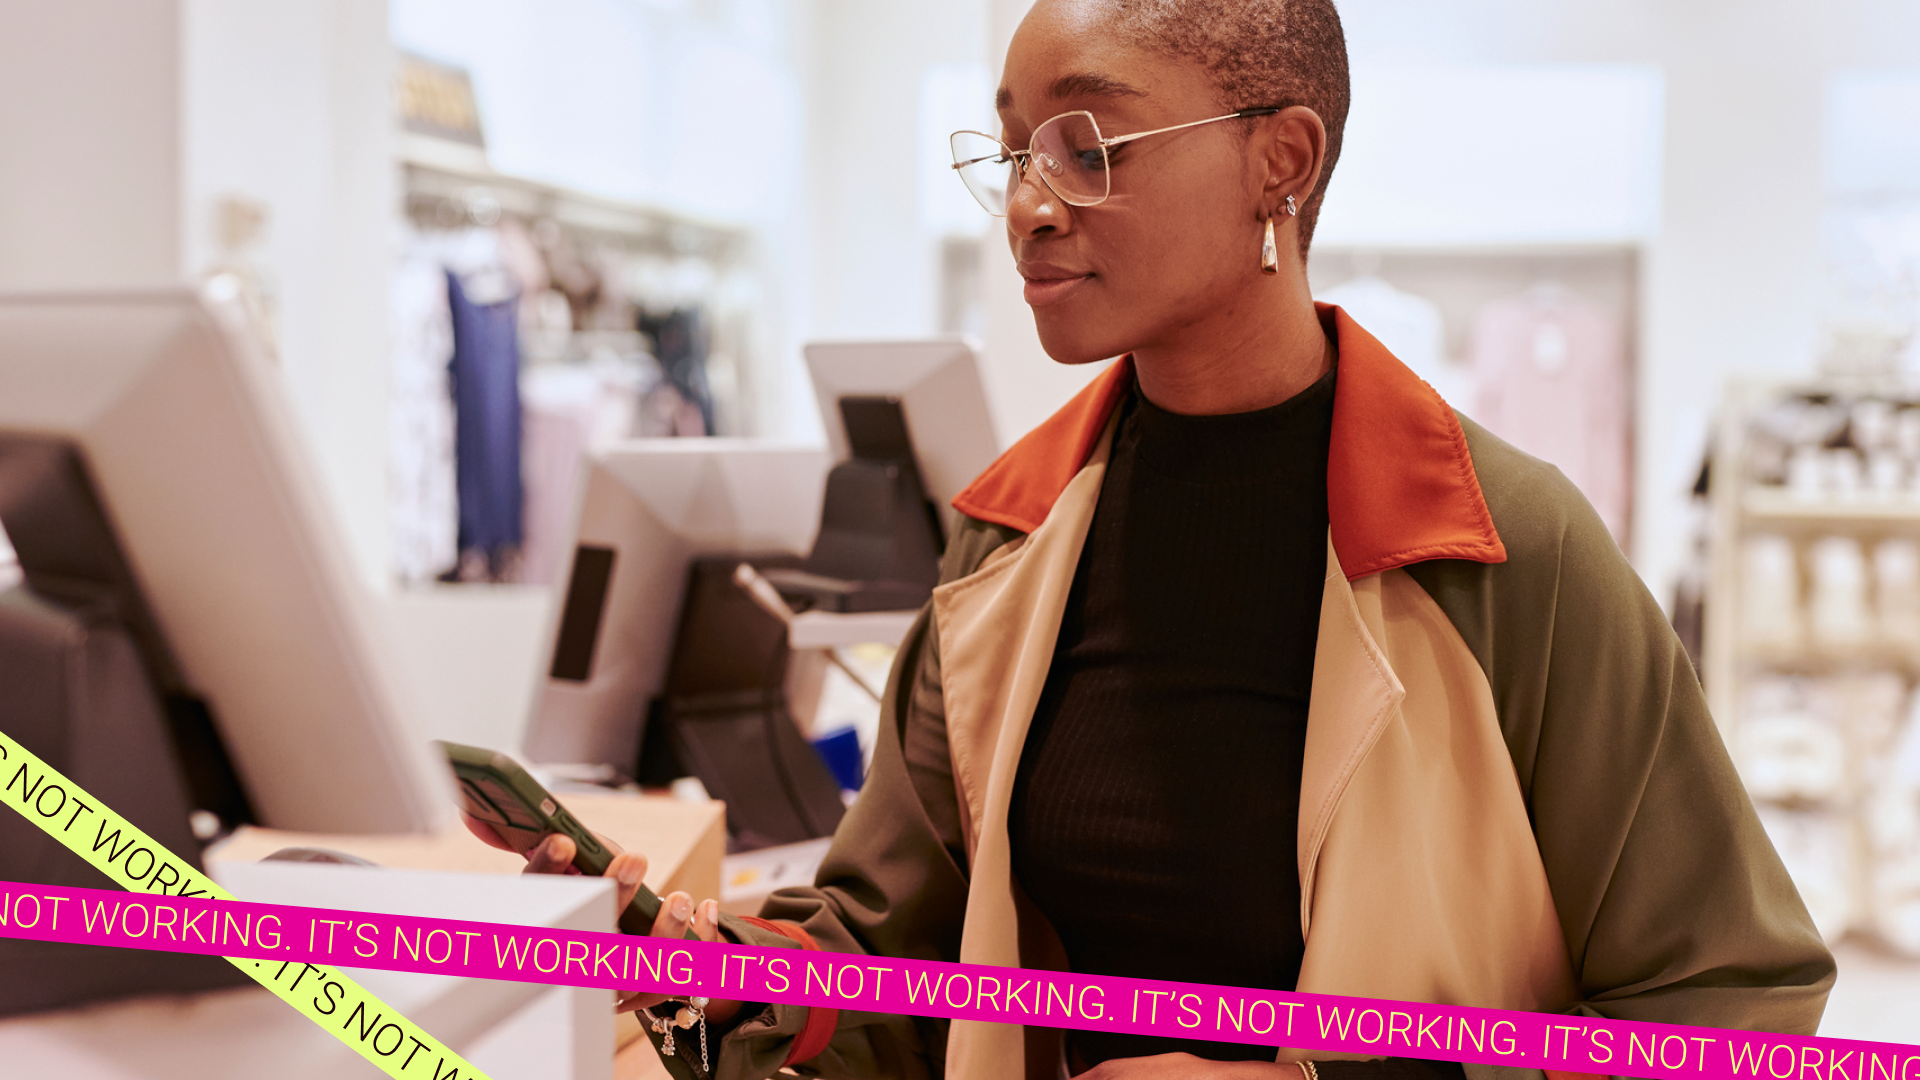 Woman checks her phone while shopping. Tired of being short changed at work and in relationships, women are taking action to secure their finances.